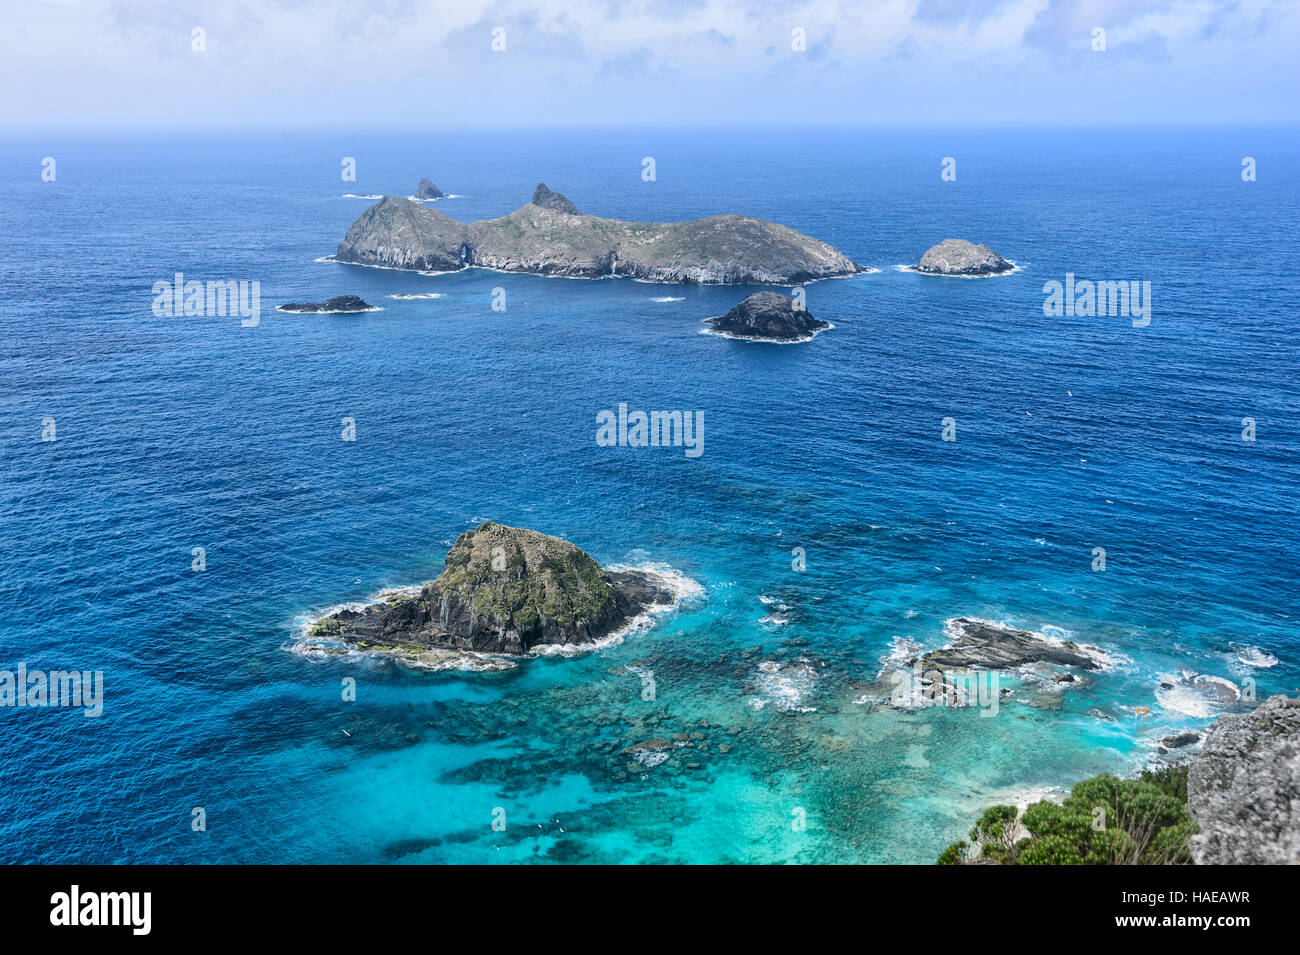 Admiralty Islands seen from Malabar Hill, Lord Howe Island, New South Wales, NSW, Australia Stock Photo